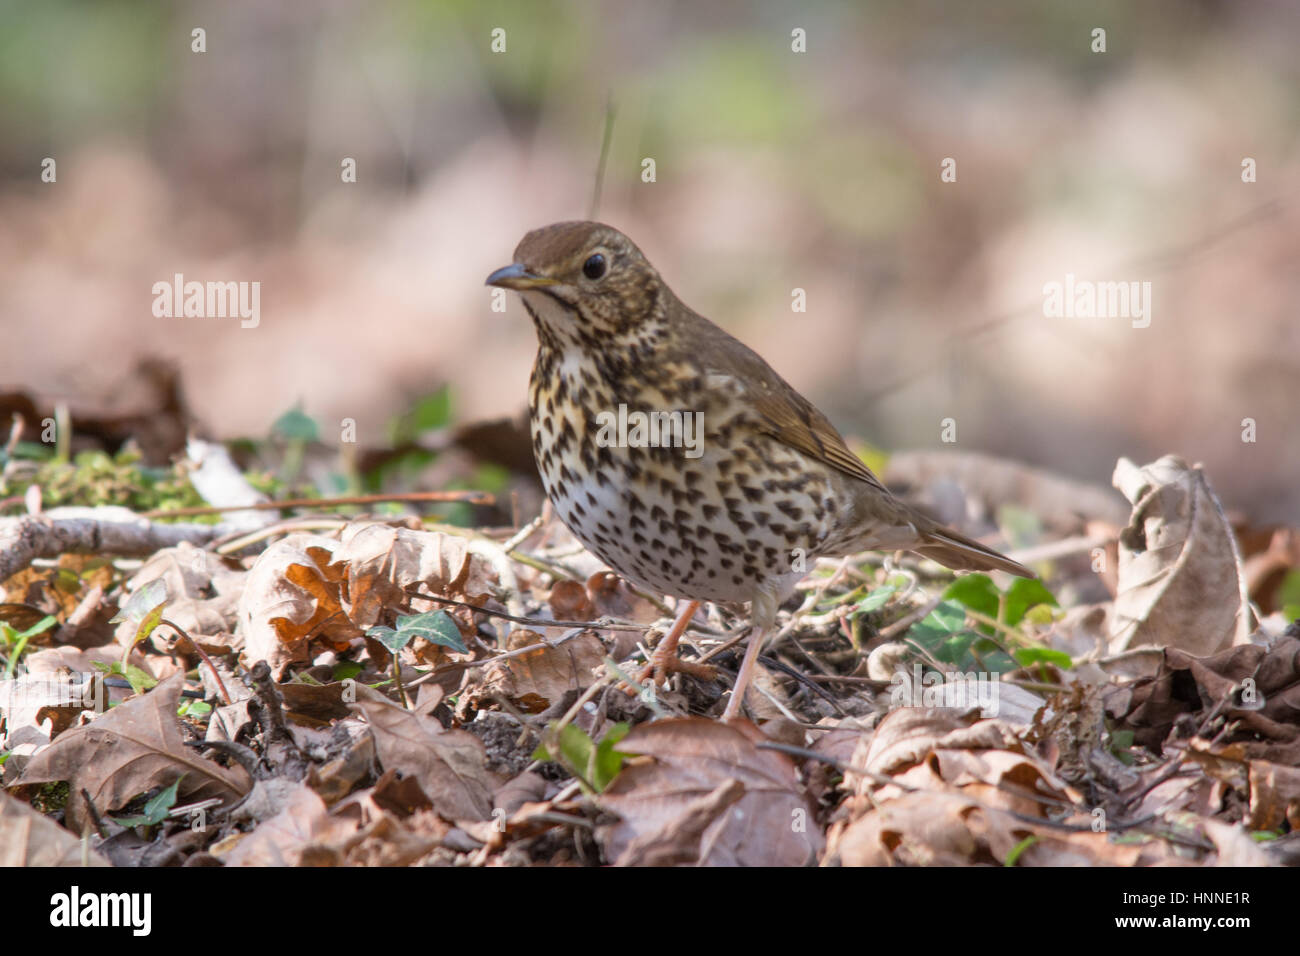 Song thrush (Turdus philomelos) among dry leaves Stock Photo